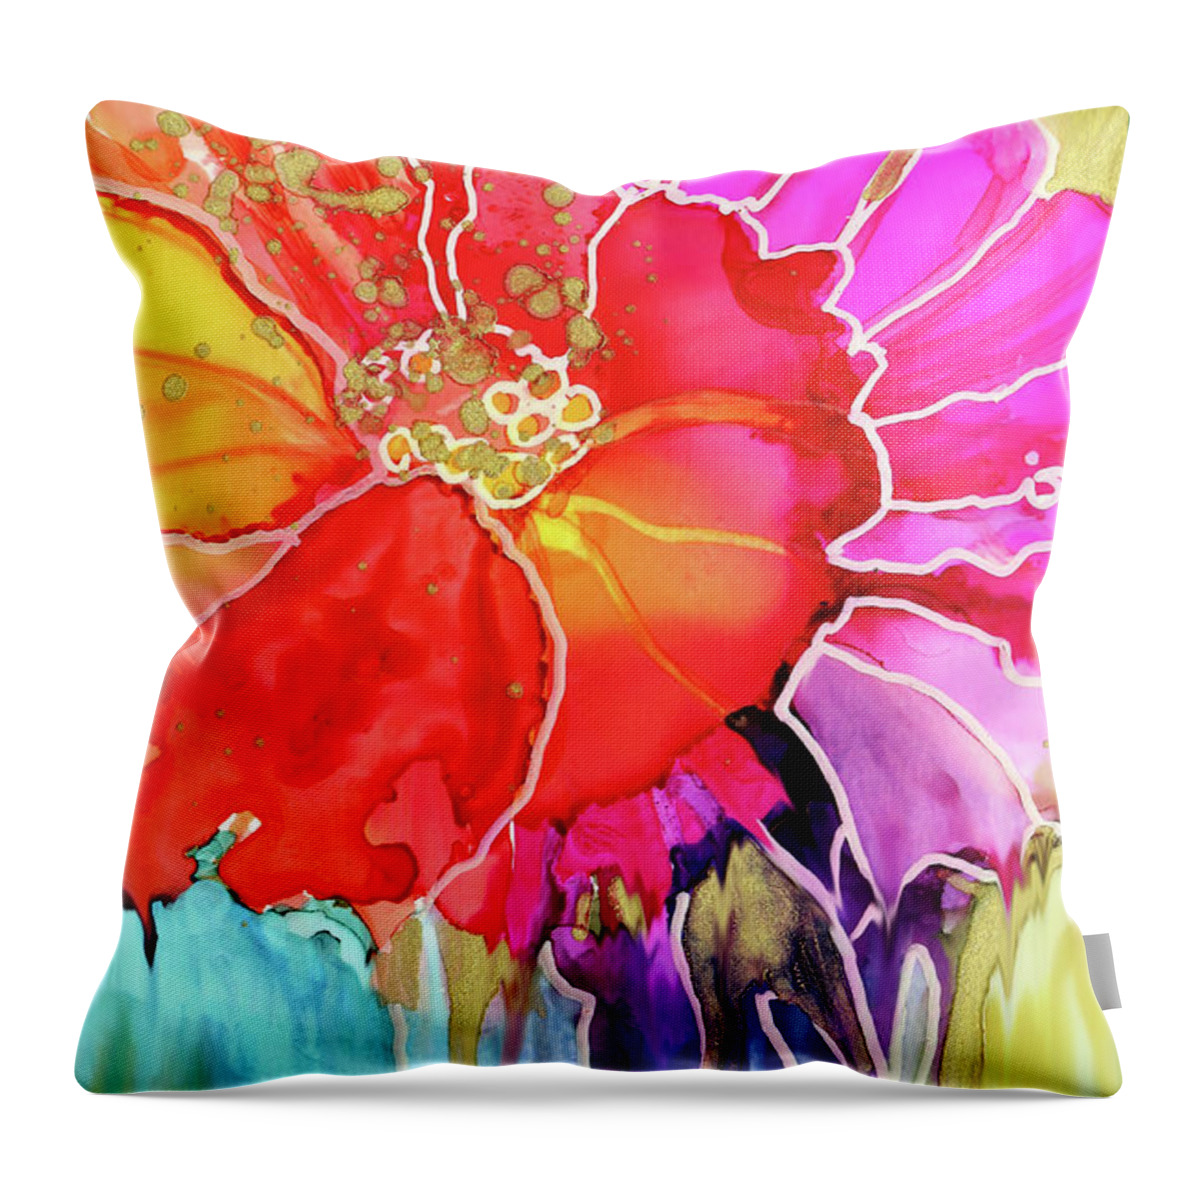  Throw Pillow featuring the painting Stained Glass Flower by Julie Tibus